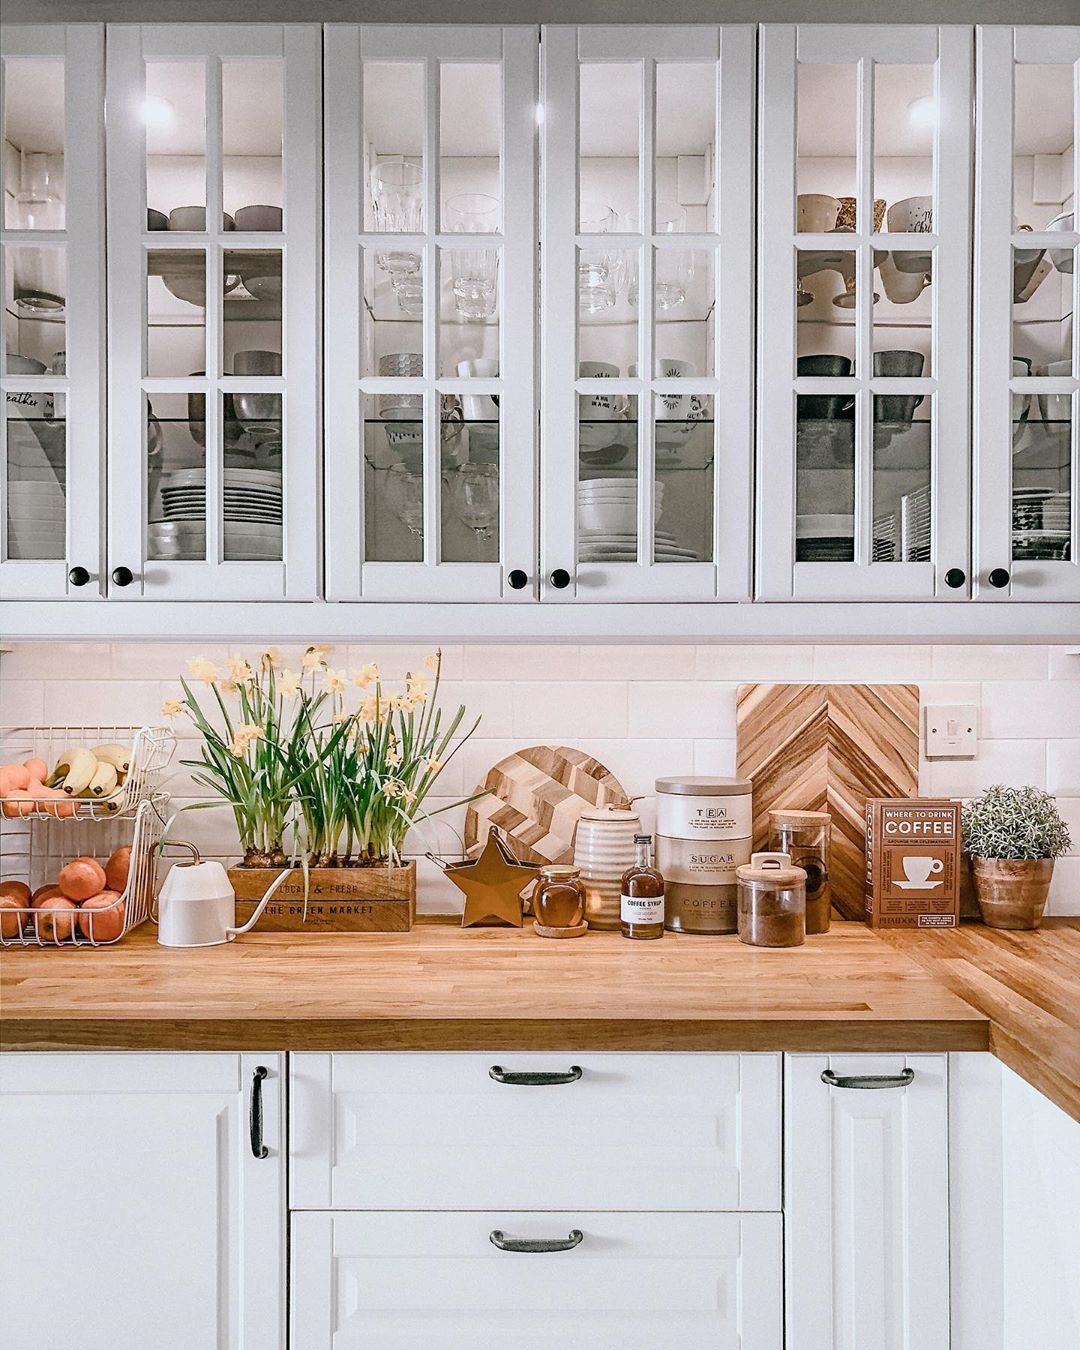 white kitchen cabinets with glass paned doors photo by Instagram user @love_lives_here